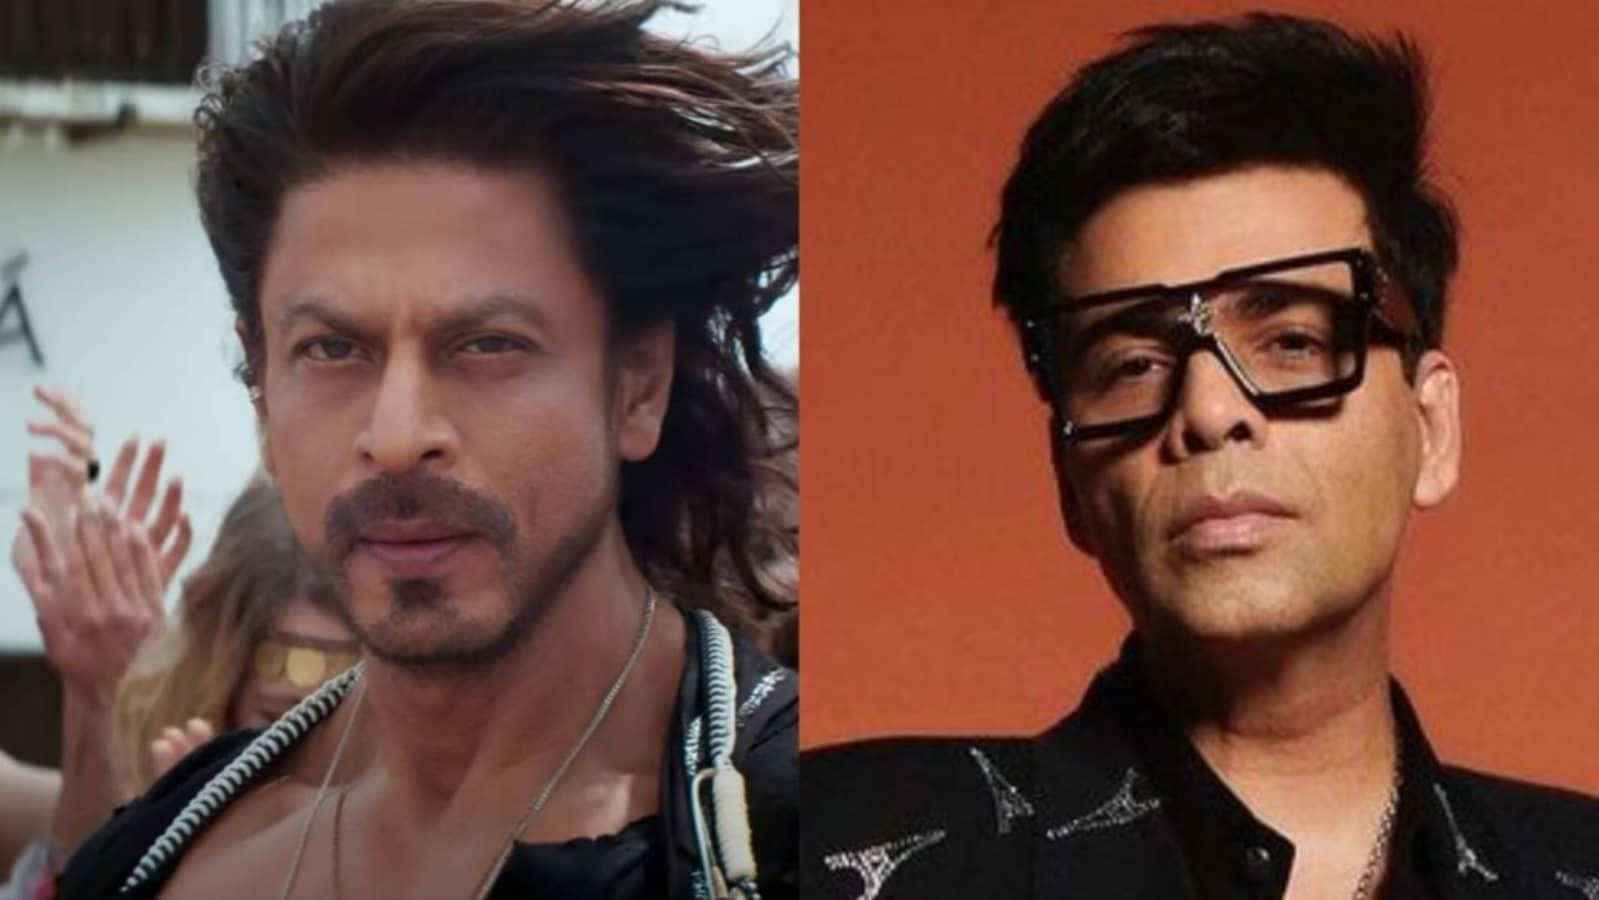 Karan Johar says Shah Rukh Khan ‘went nowhere, waited for right time to rule’, hails Pathaan as ‘biggest blockbuster’